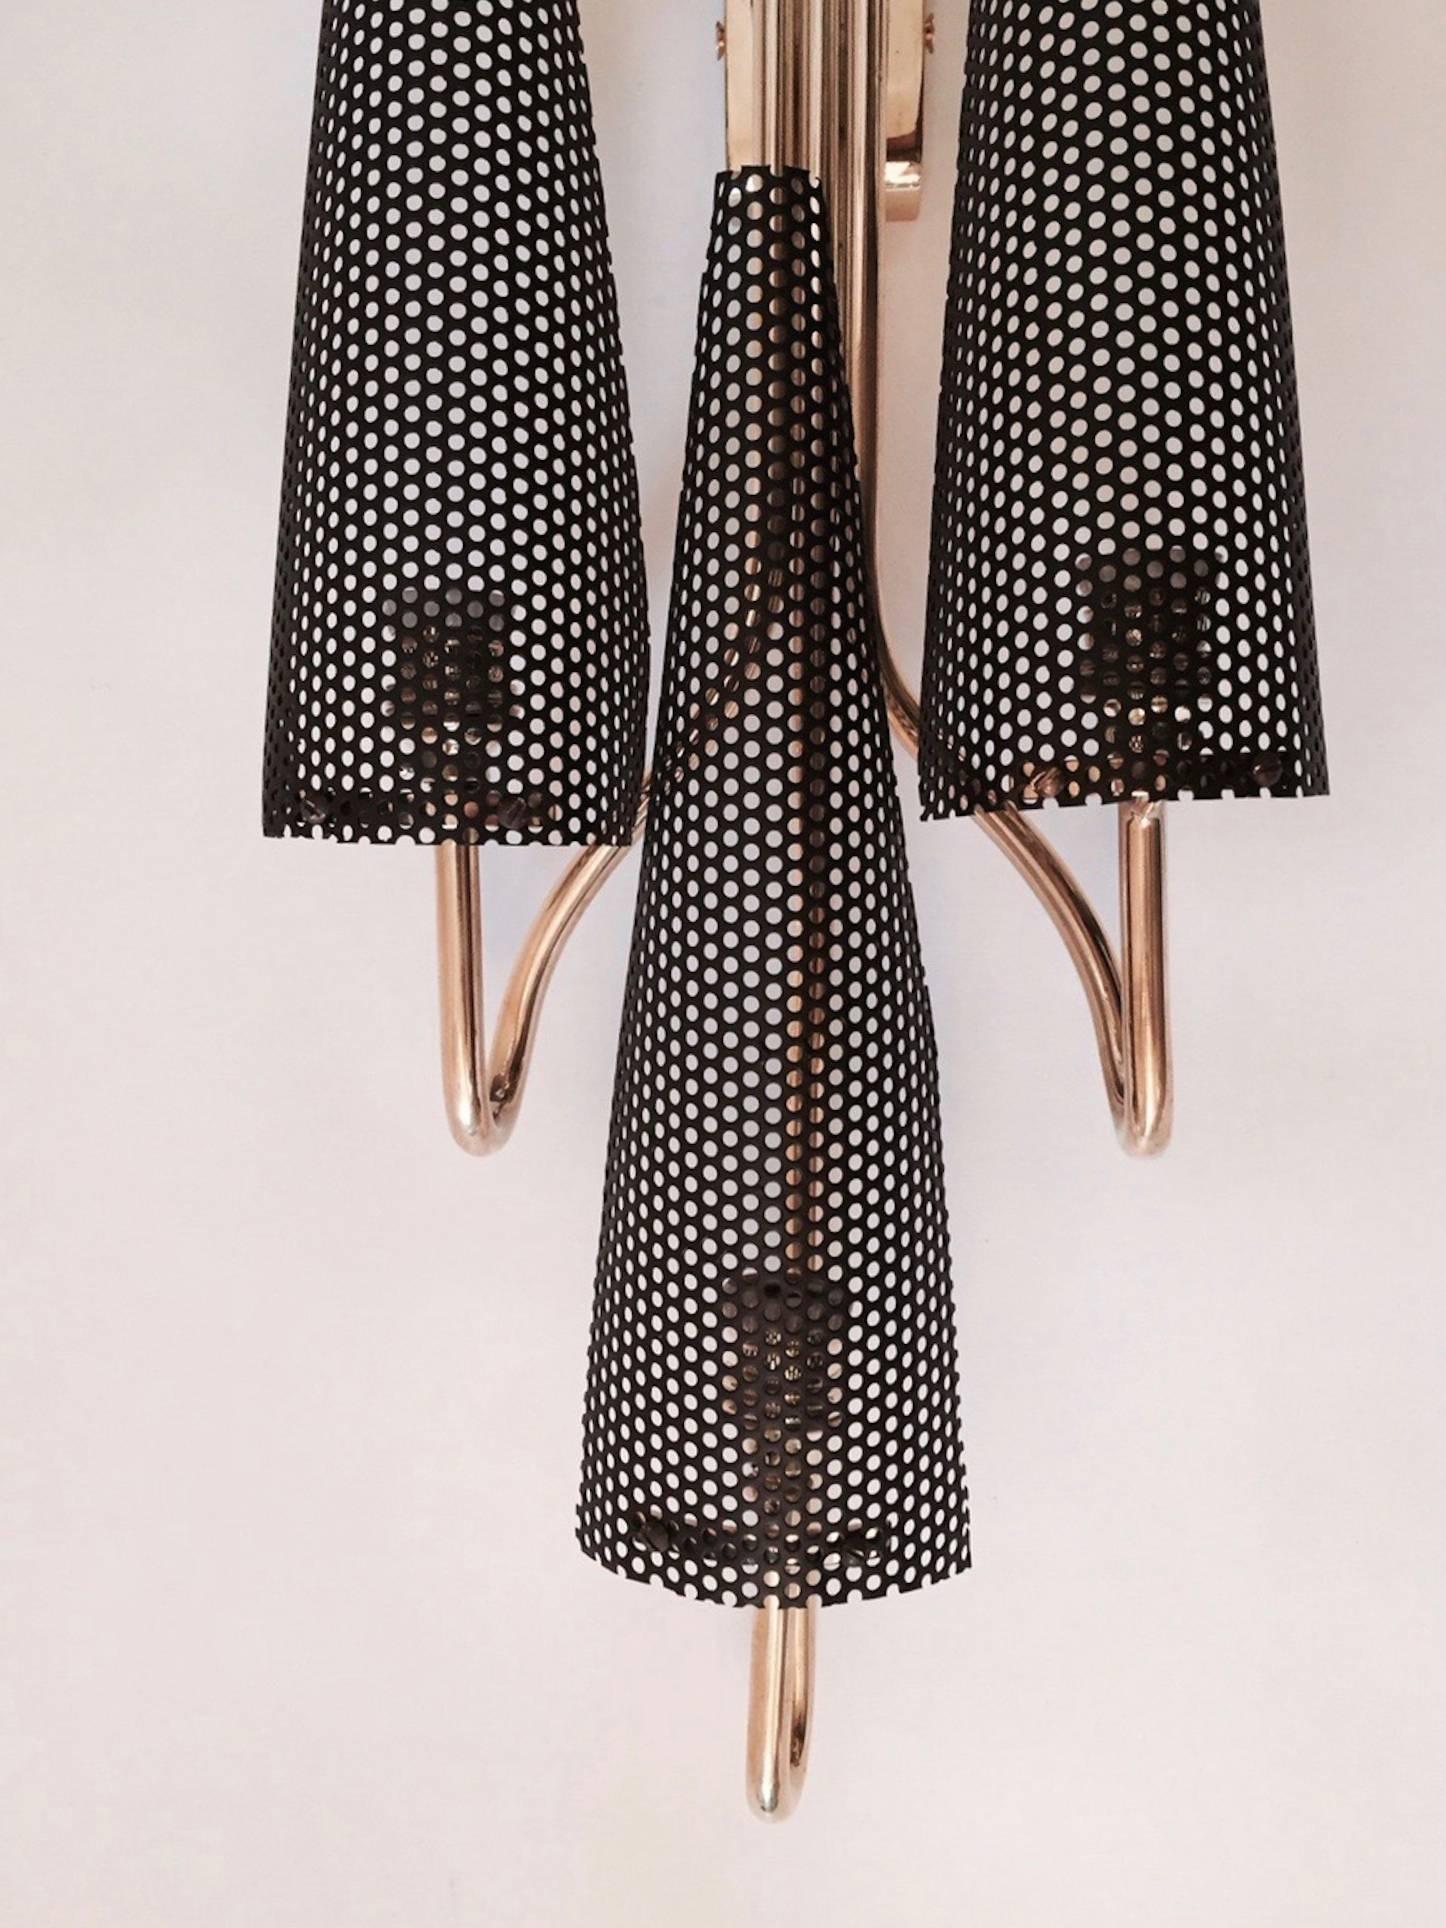 Pair of 1950s sconces attributed to Jacques Biny.
The sconces are composed of three gilt brass rods splitter on the base. 
They are highlighted by black perforated steel sheet semicircular lampshades. Three lighted arms per sconce.